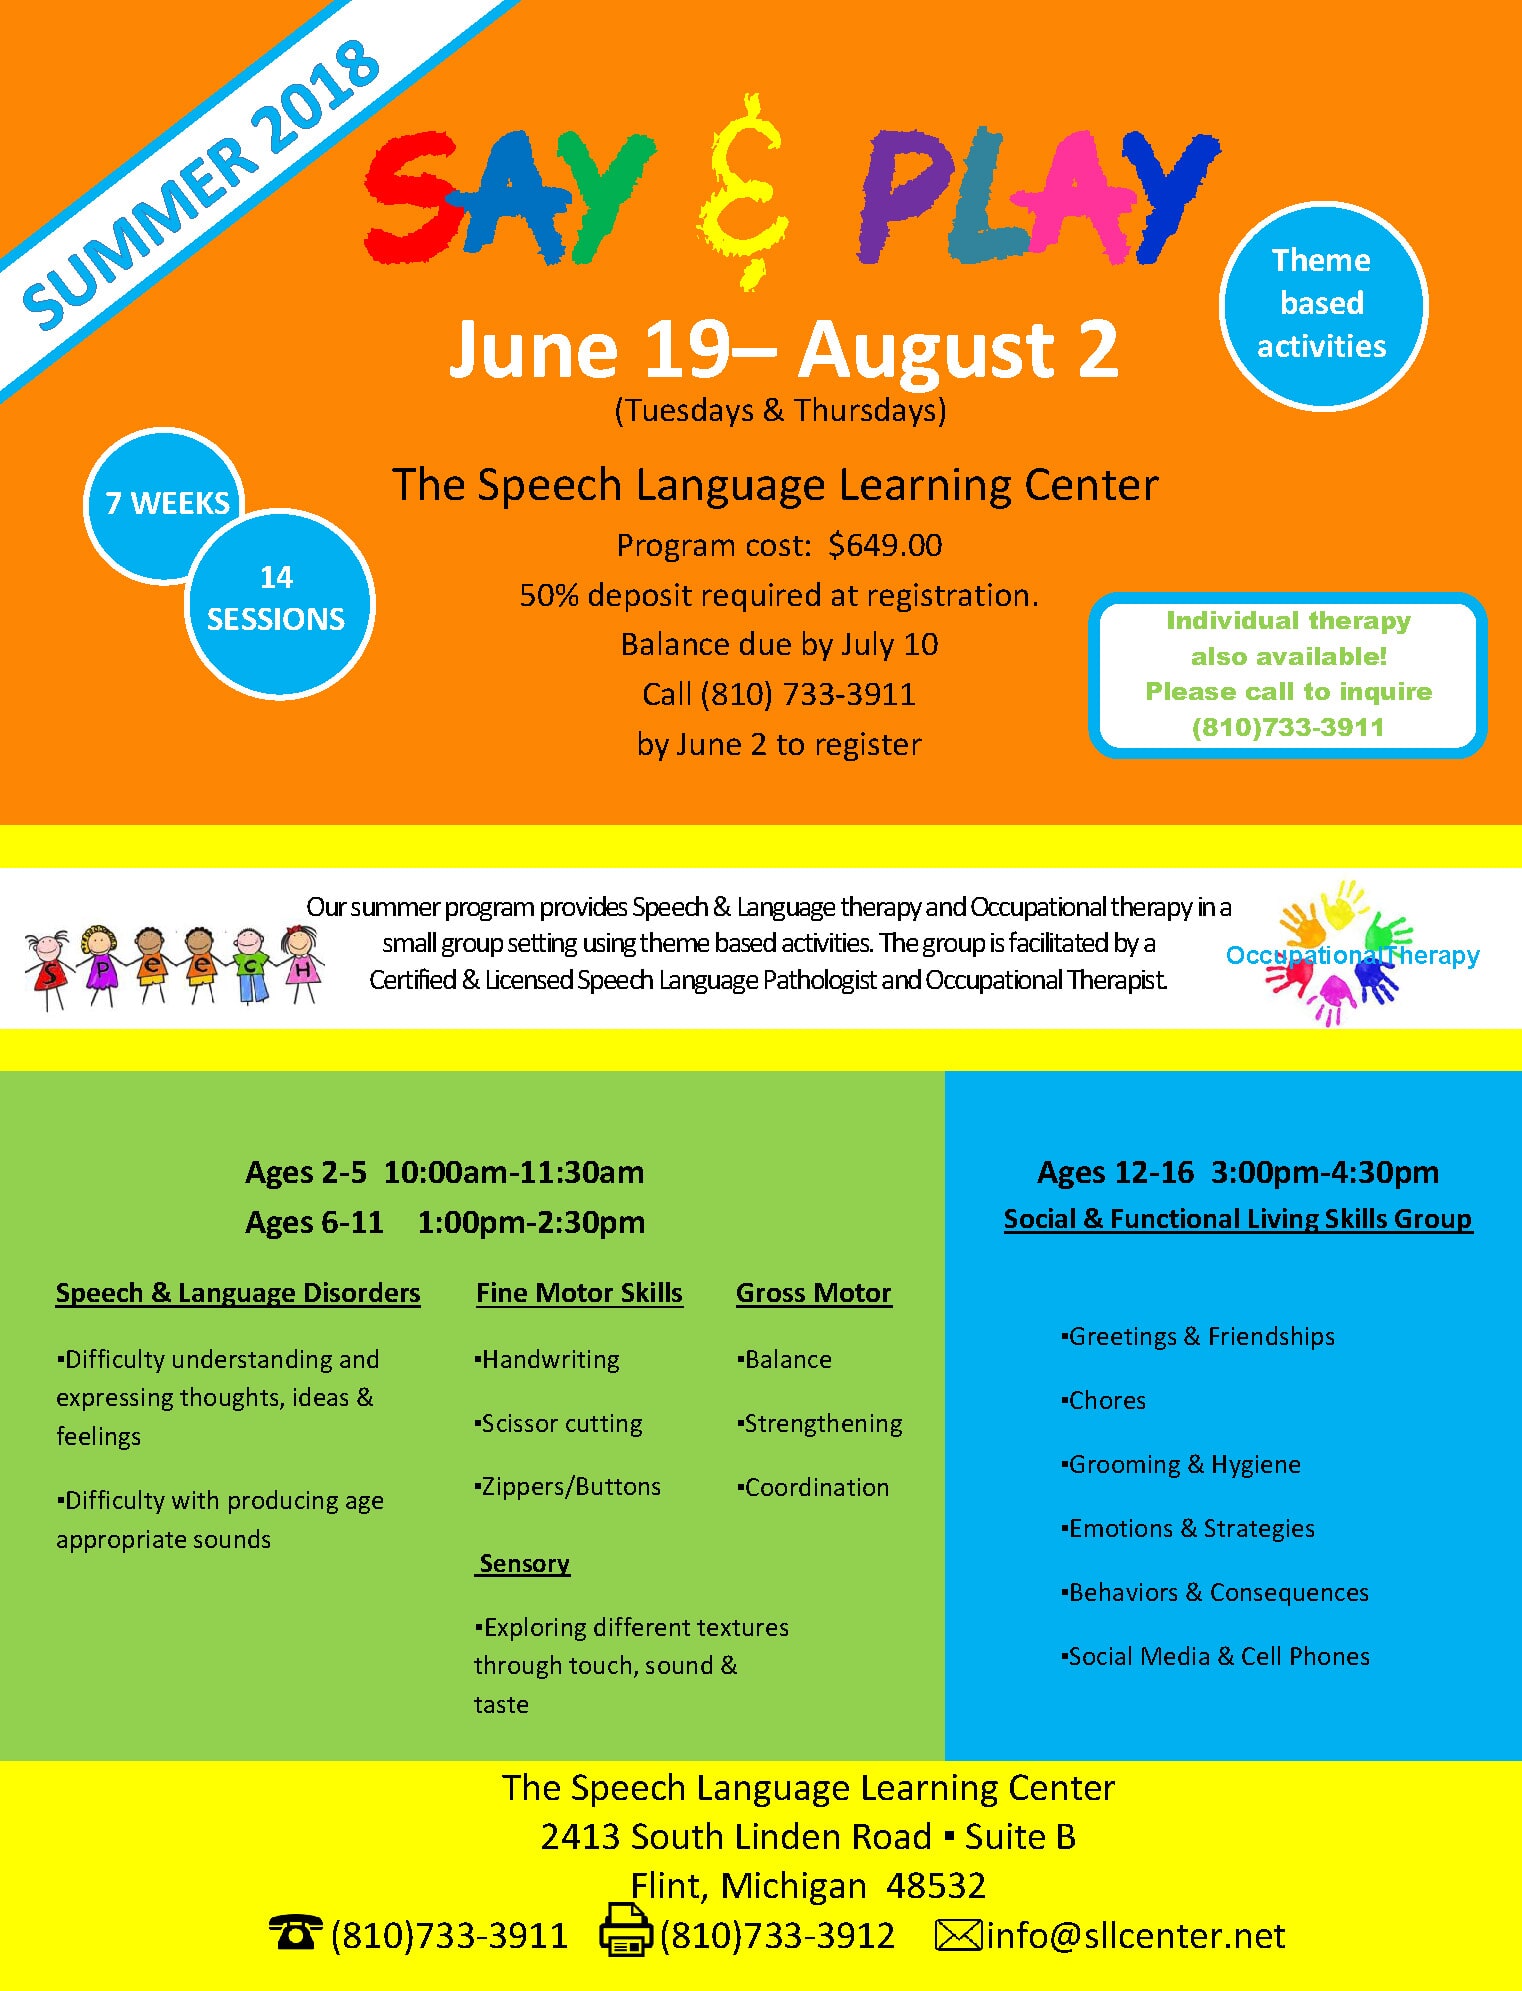 The Speech Language Learning Center Photo